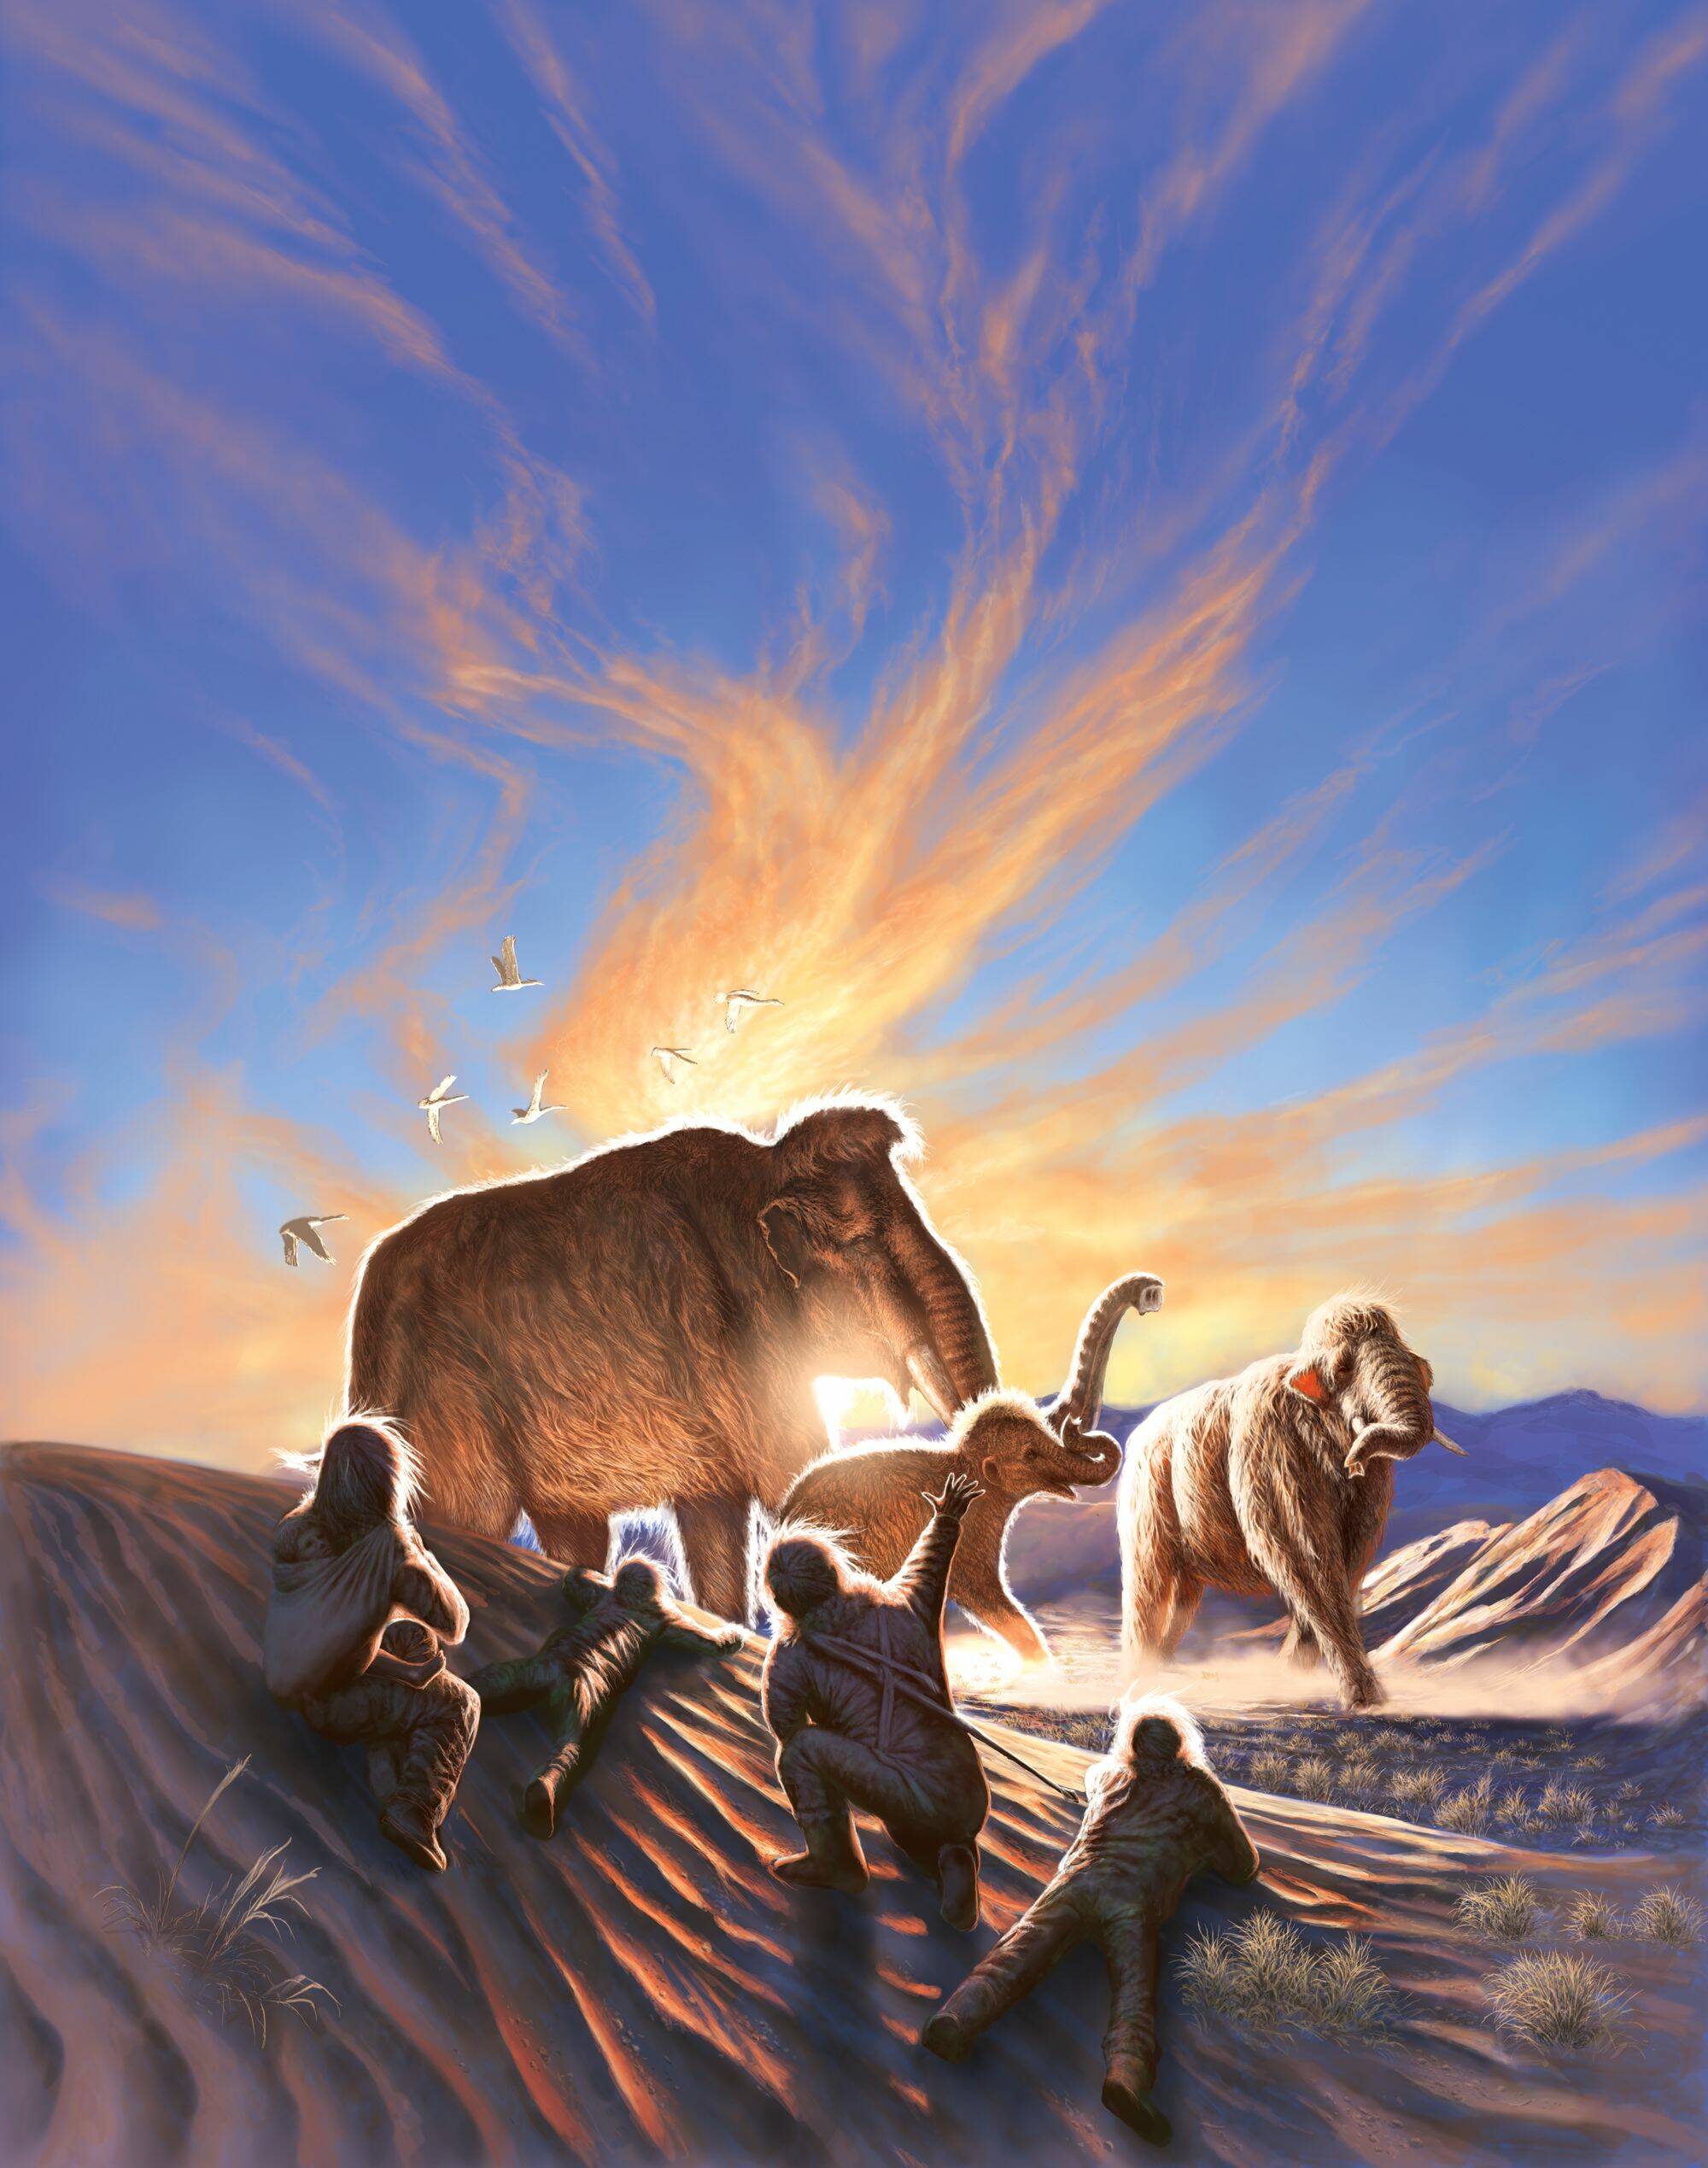 In this work of art produced by Julius Csotonyi, a group of ancient people watch mammoths roam over sand dunes in Interior Alaska, north of Swan Point archeological site. (Artwork by Julius Csotonyi)